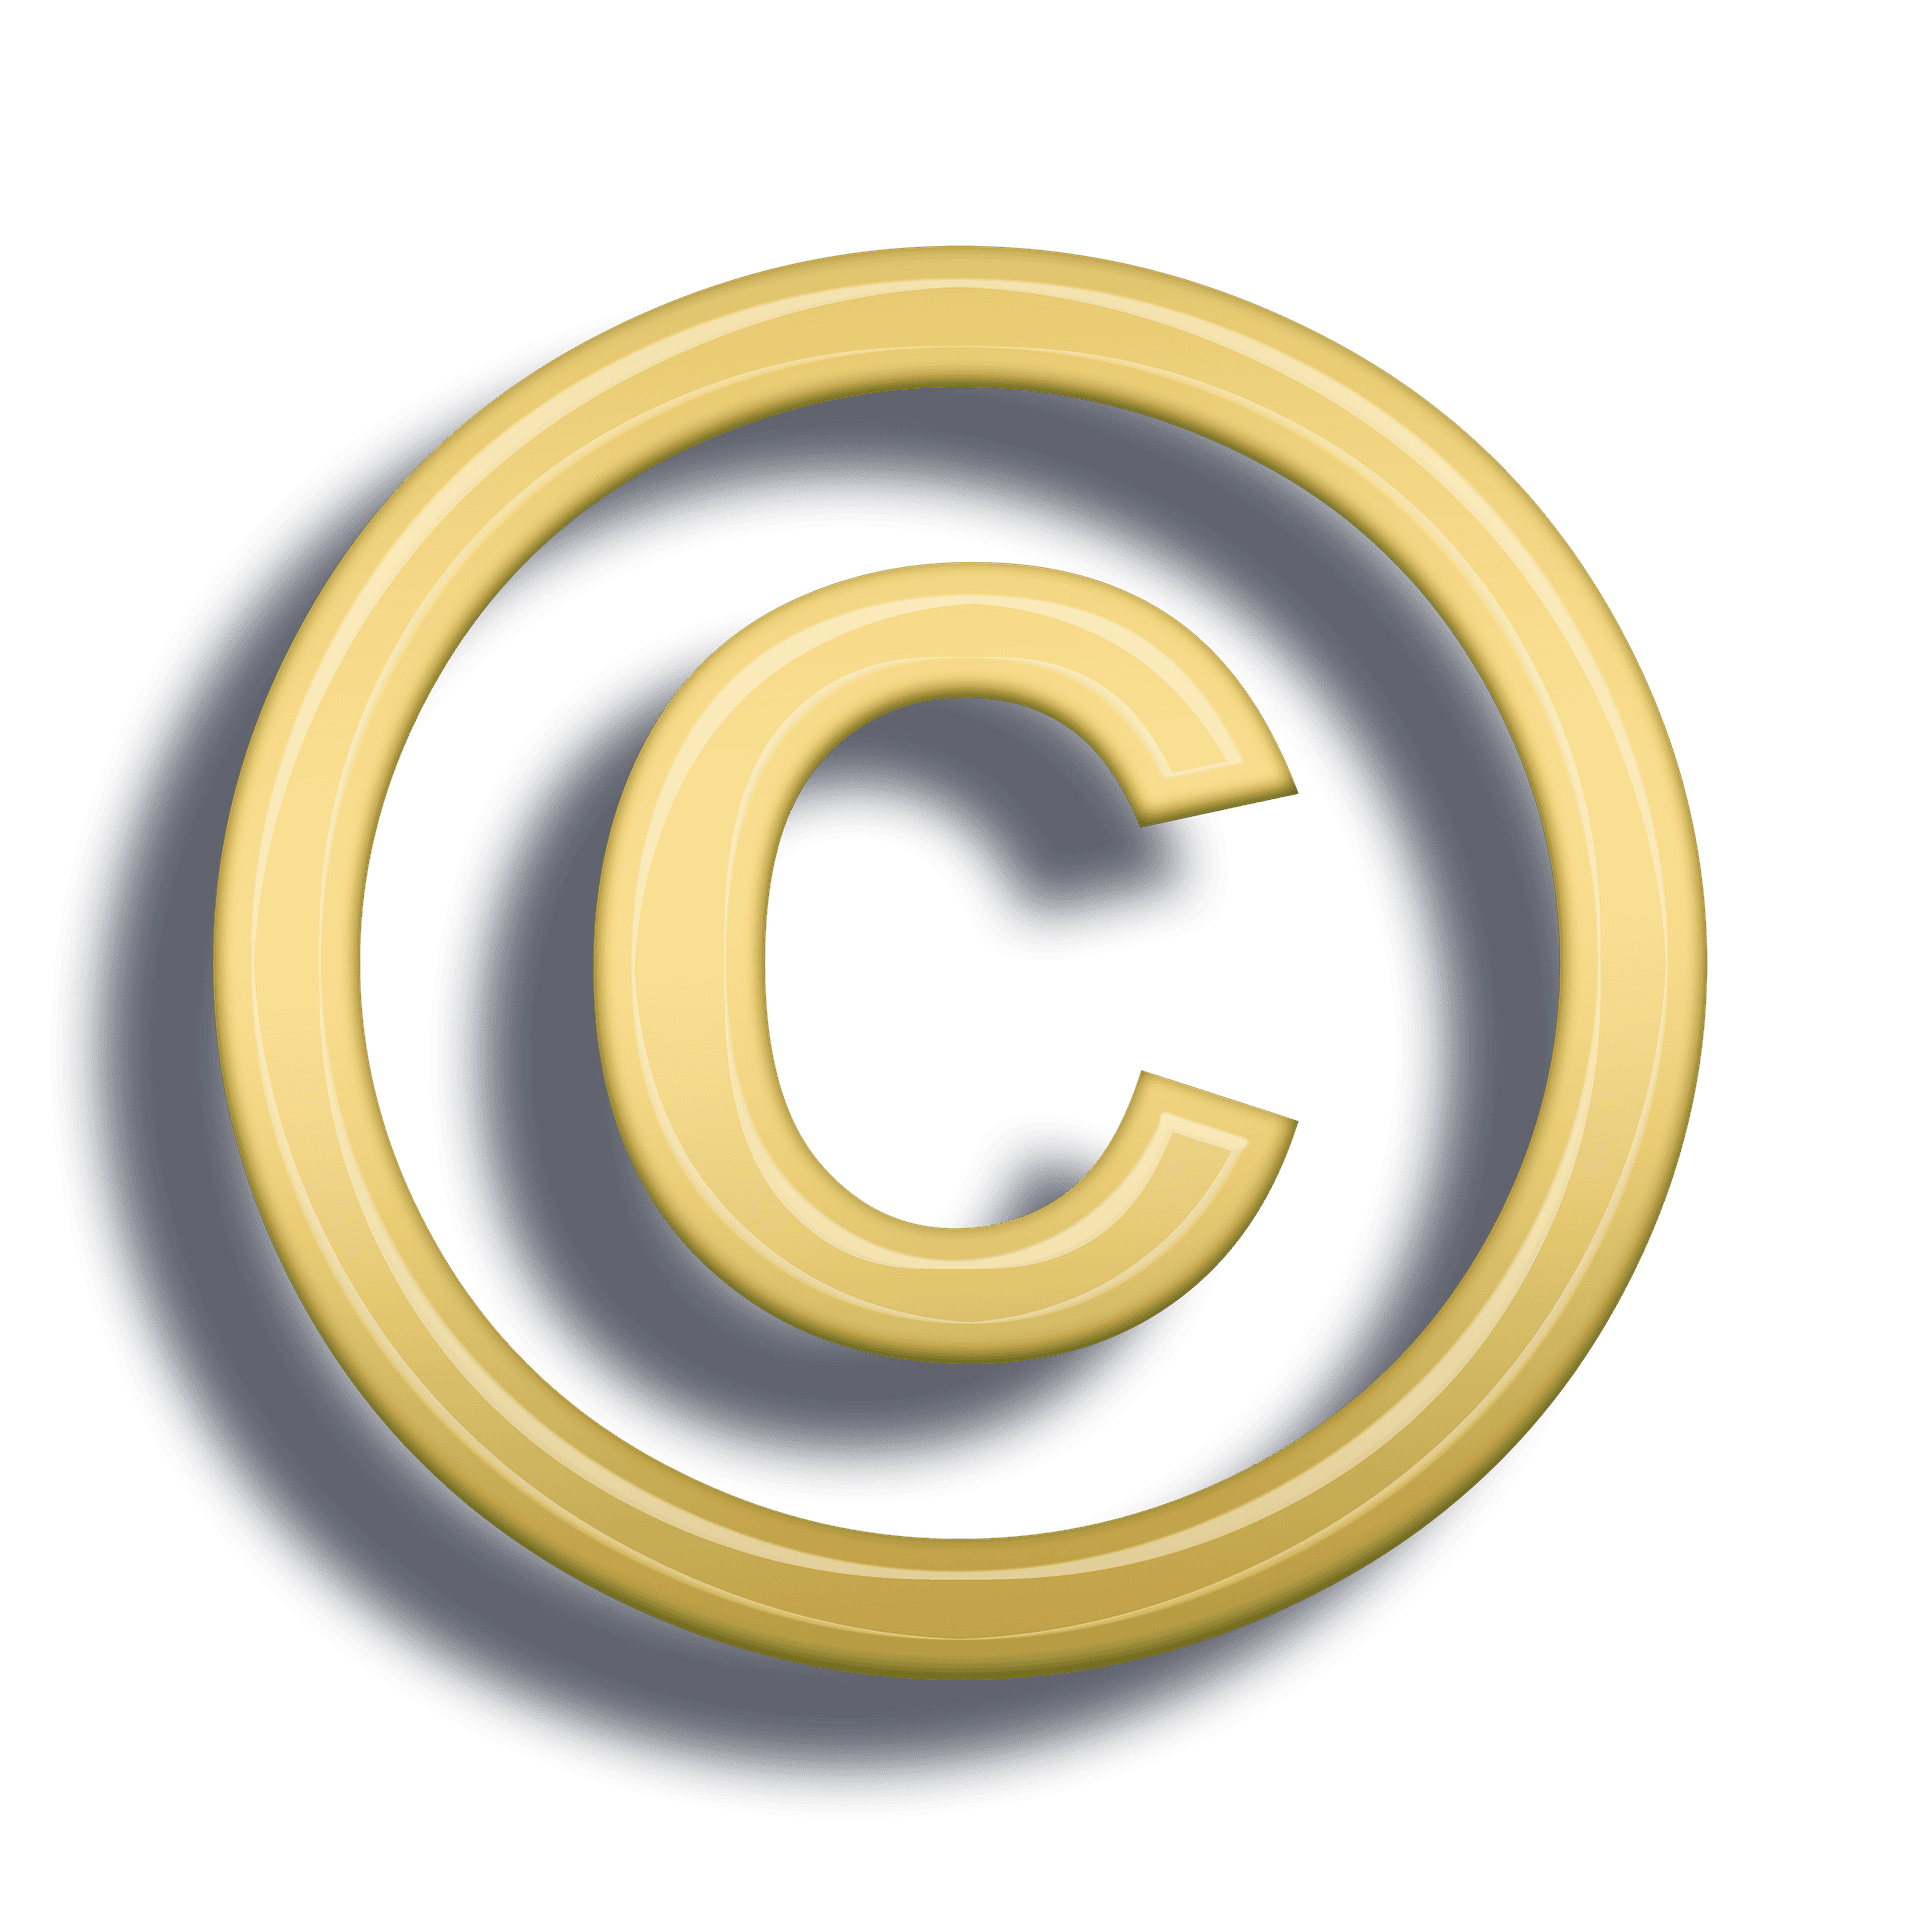 How does a Copyright License Agreement protect me?